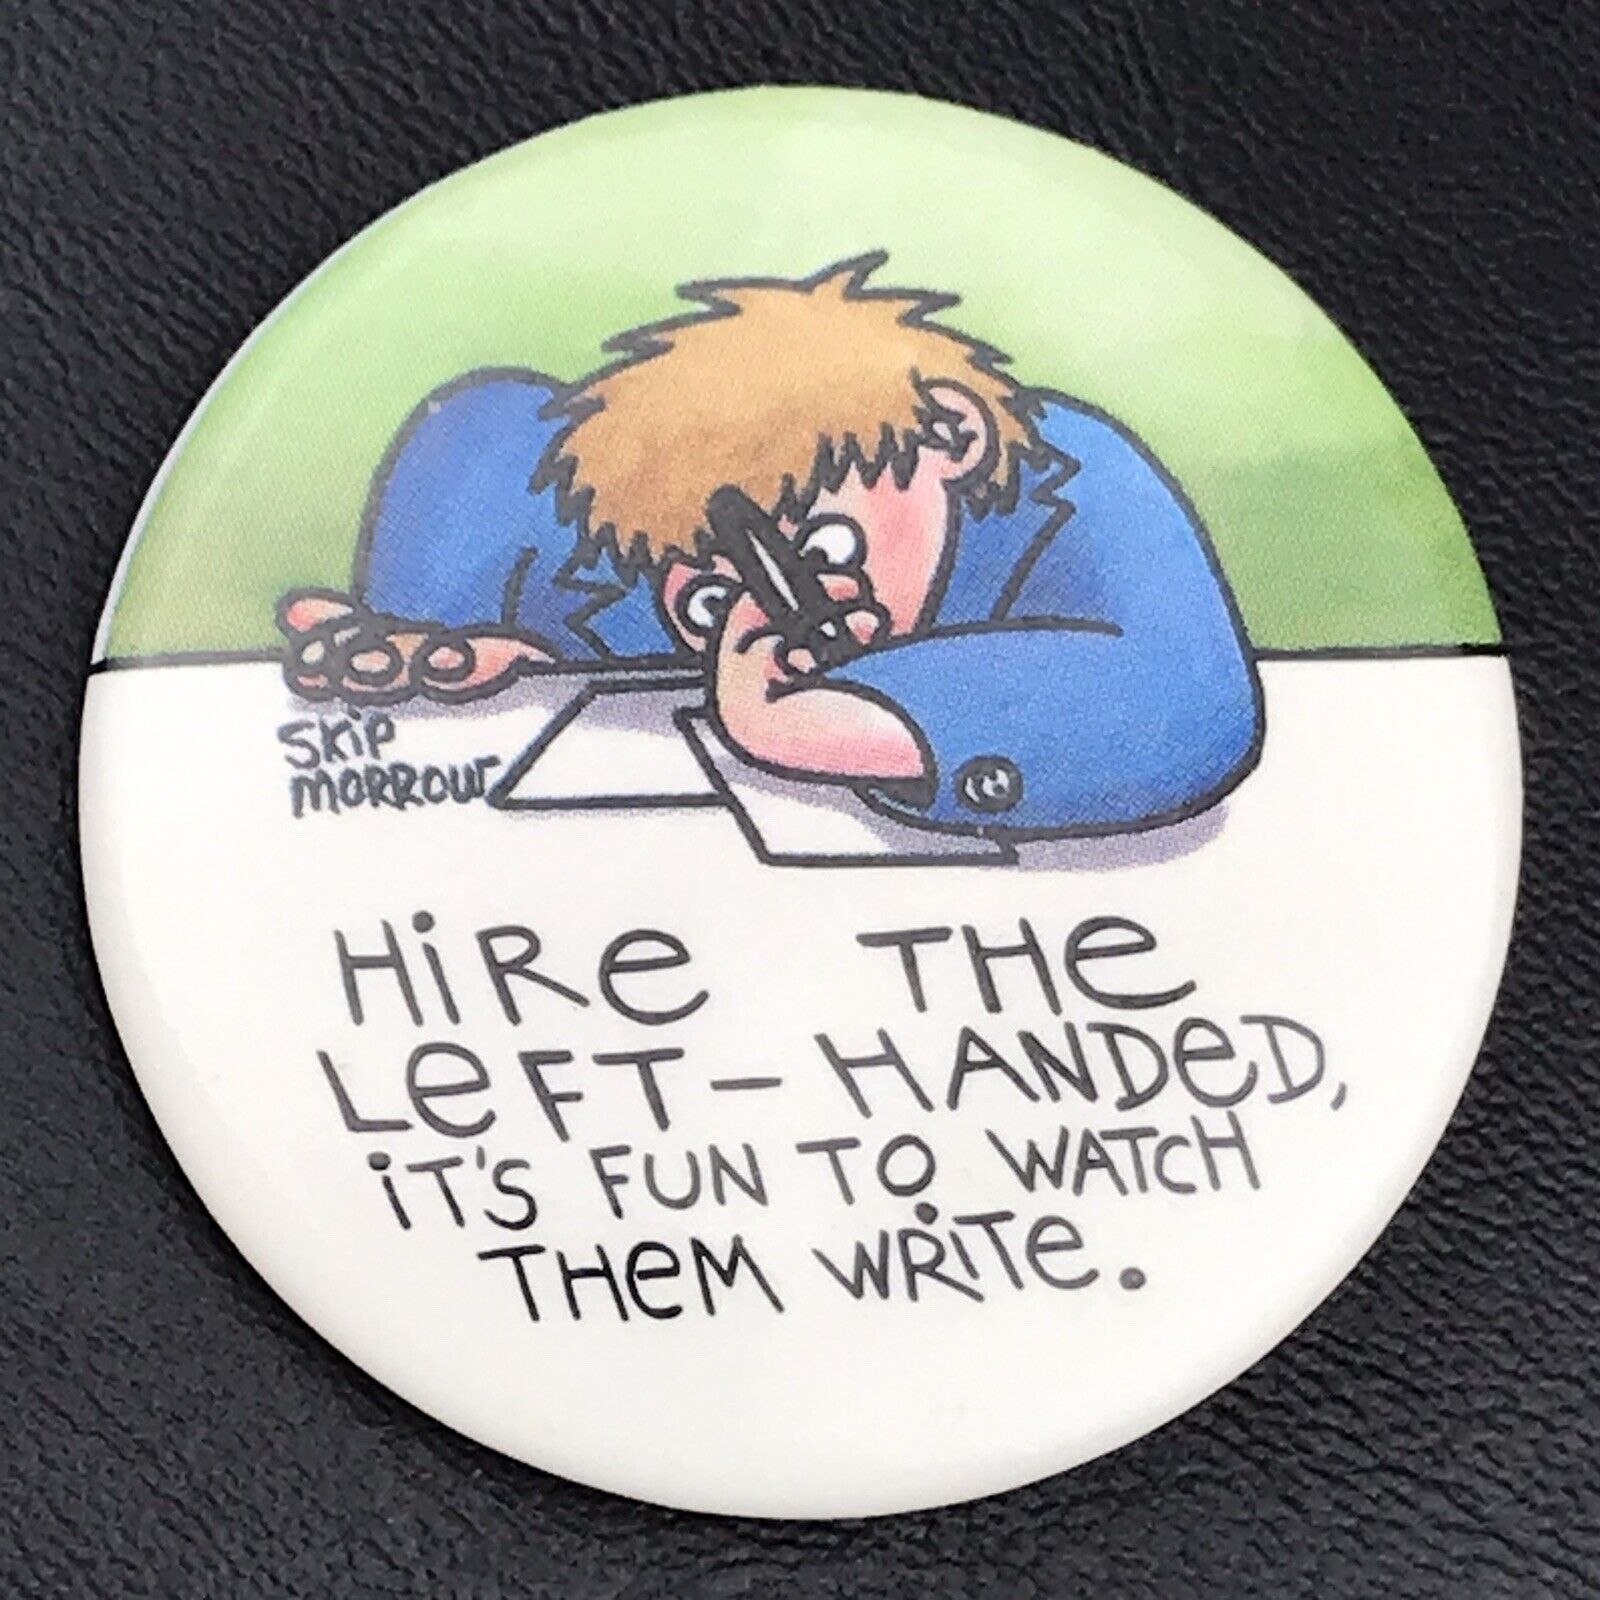 Hire The Left Handed It’s Fun To Watch Them Write Vintage Pin Button Pinback